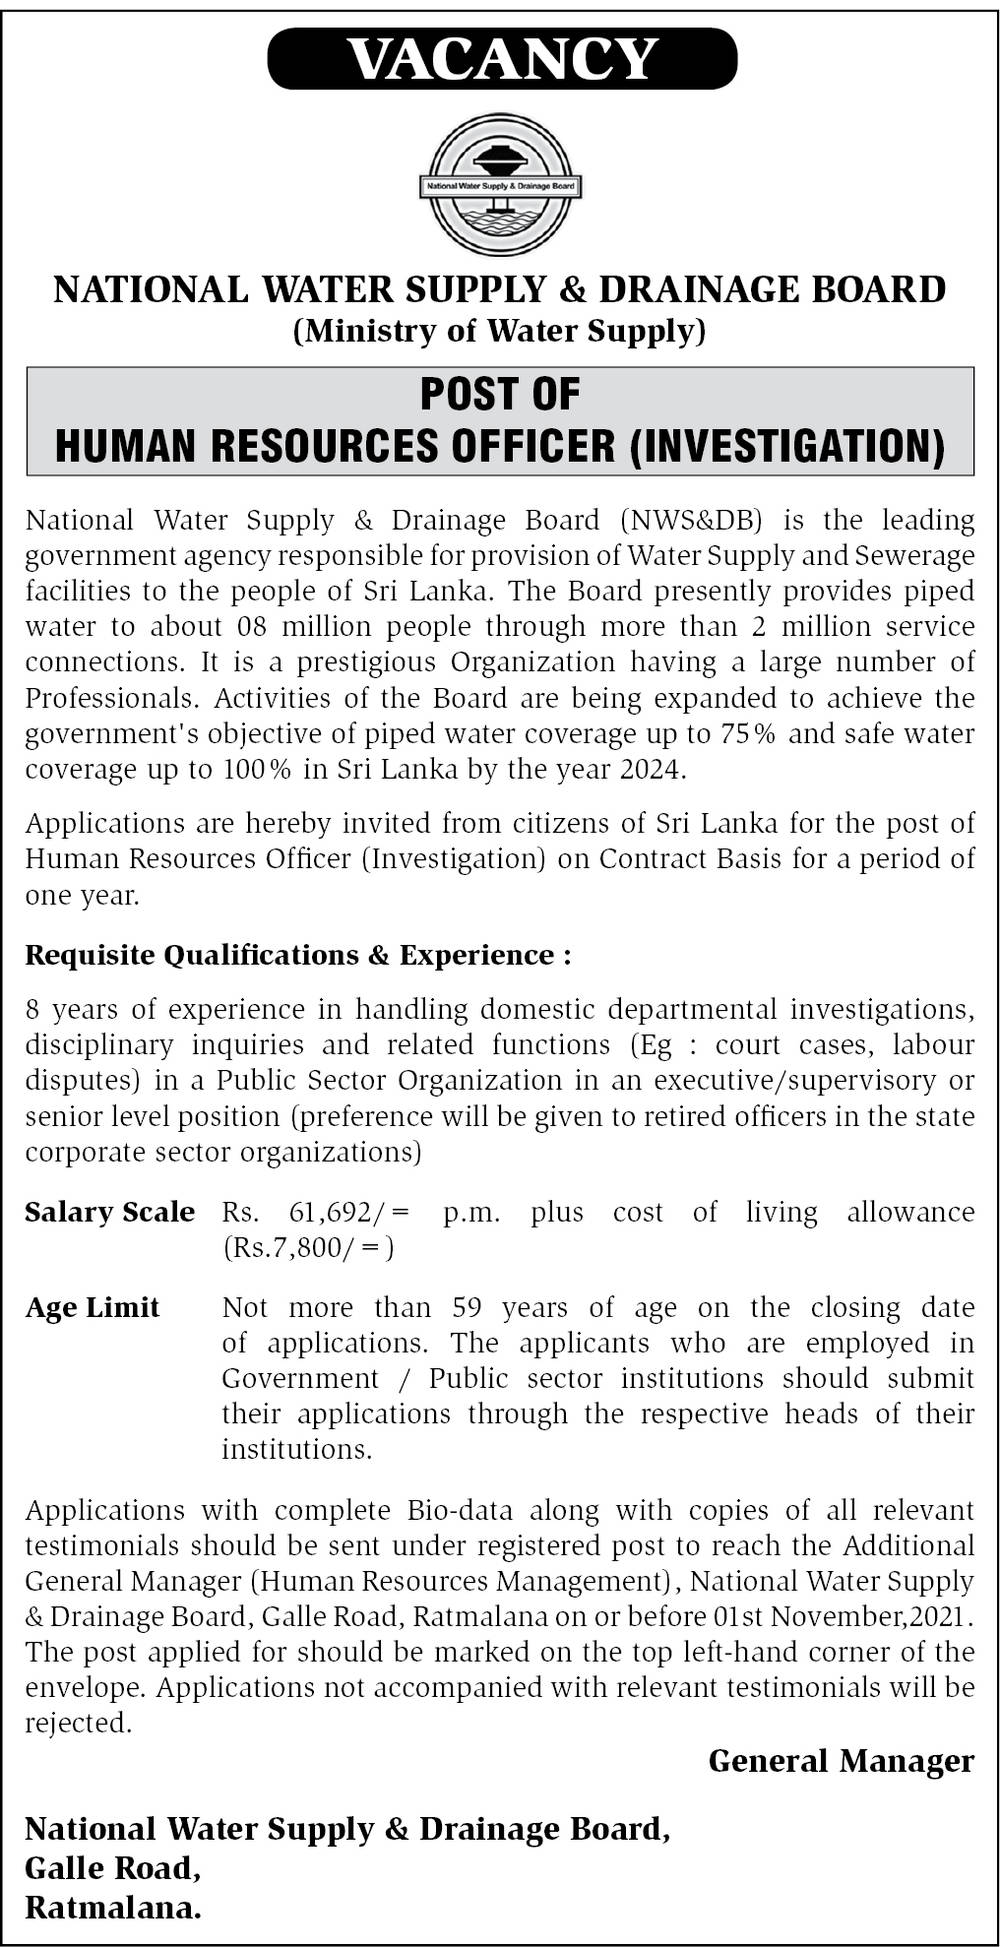 Human Resources Officer - National Water Supply & Drainage Board English